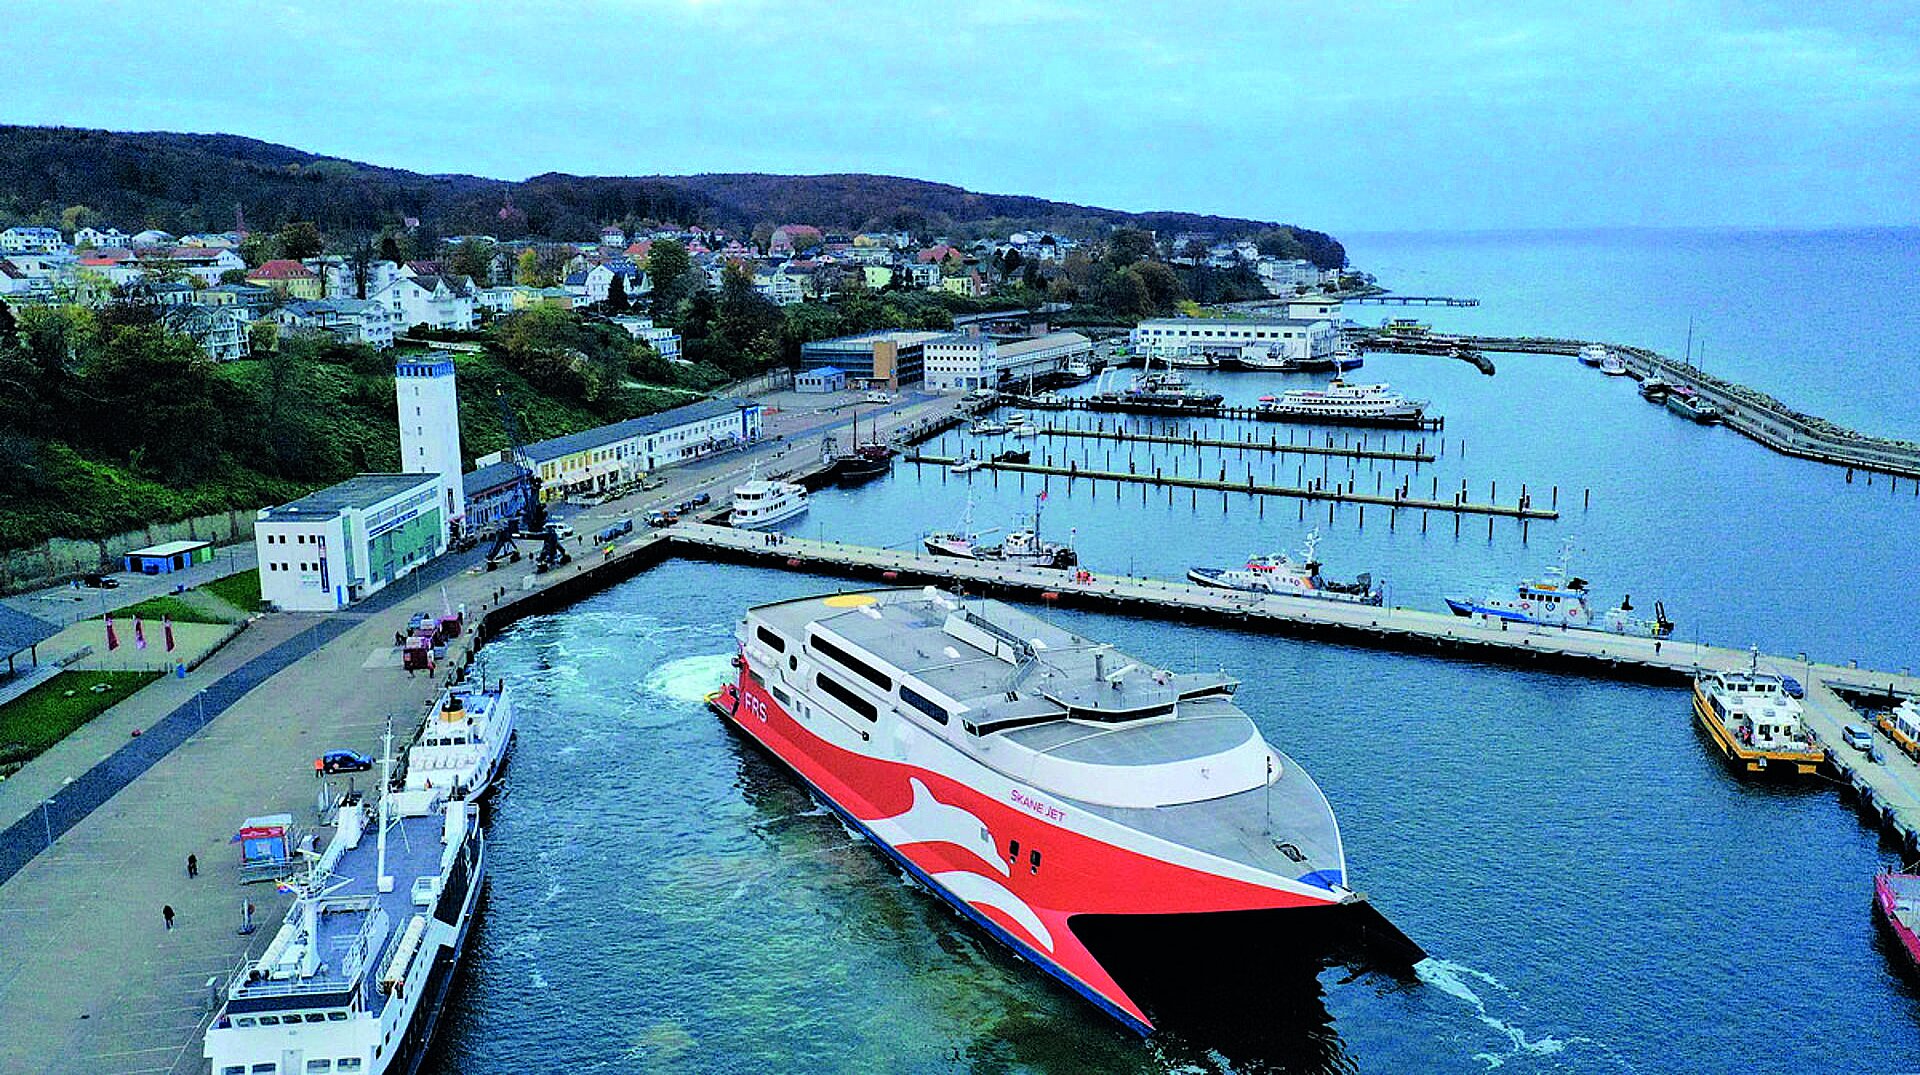 The "Skane Jet" in the Sassnitz town harbour.